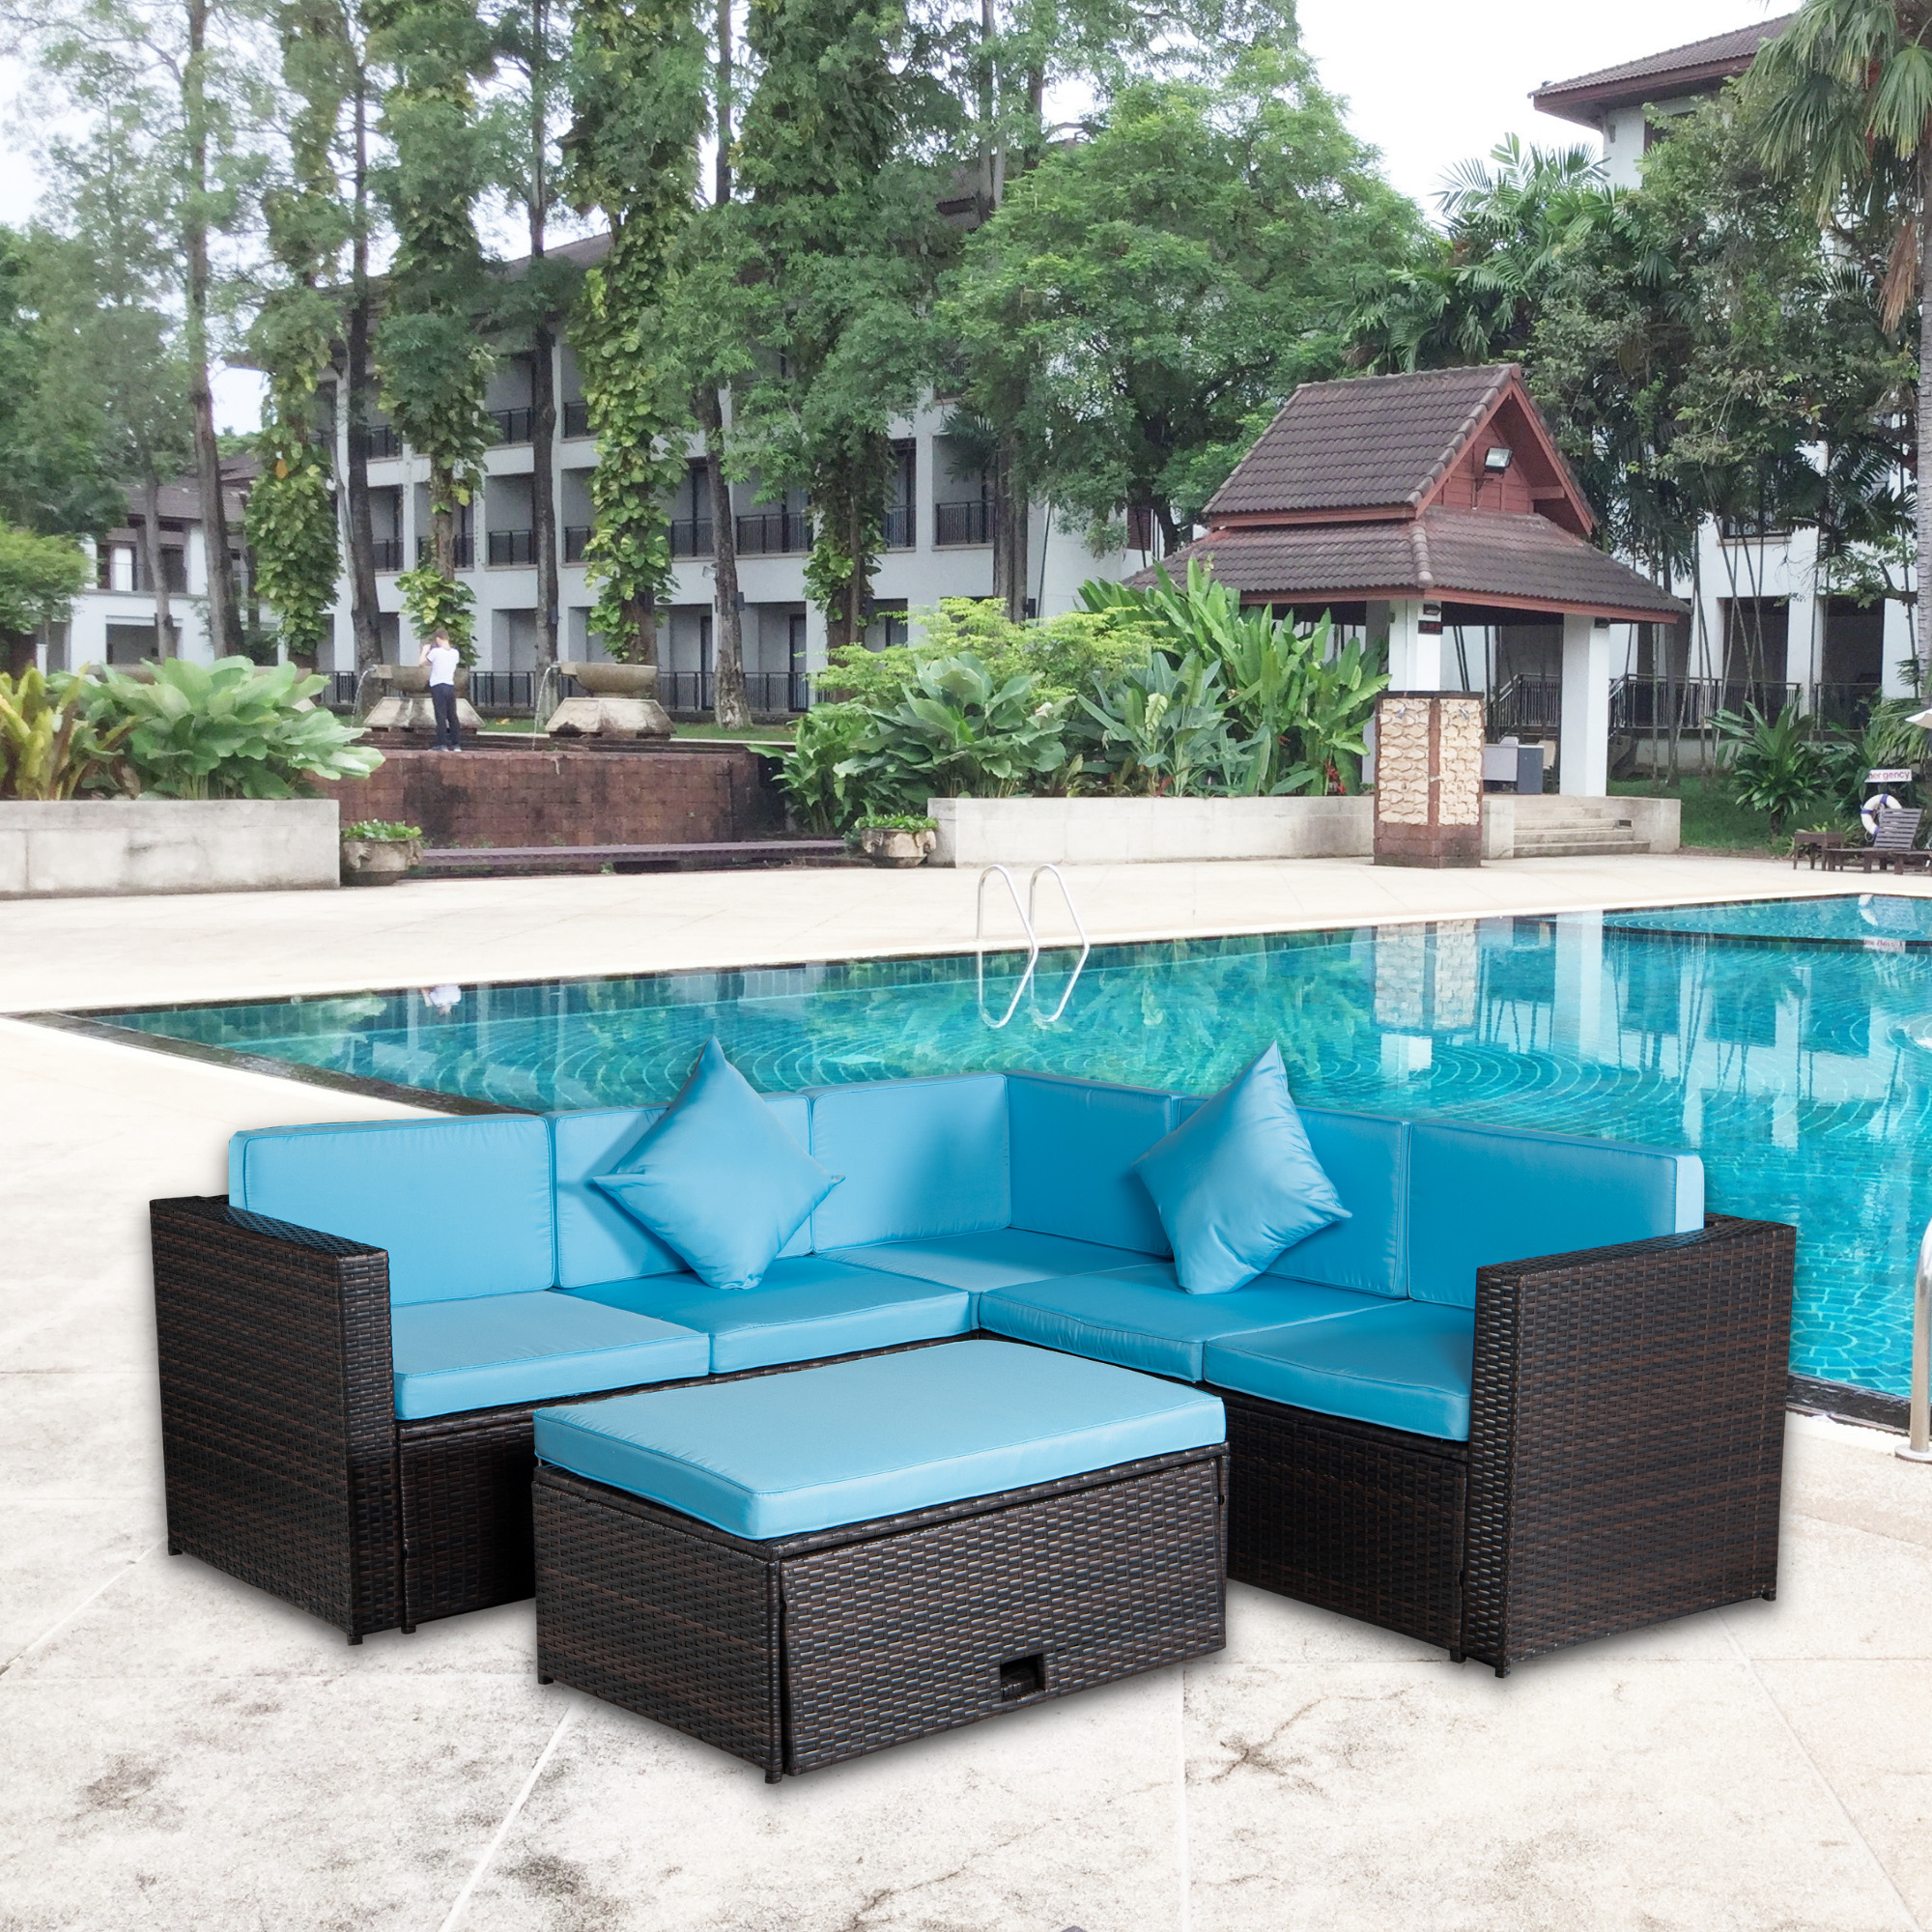 Outdoor Furniture Sets Sofa Sets, 4 PCS Conversation Sets Sectional Furniture Set with 2 Loveseat, Corner Chair, and Wicker Table for Garden Poolside Deck, LJ3267 - image 2 of 11